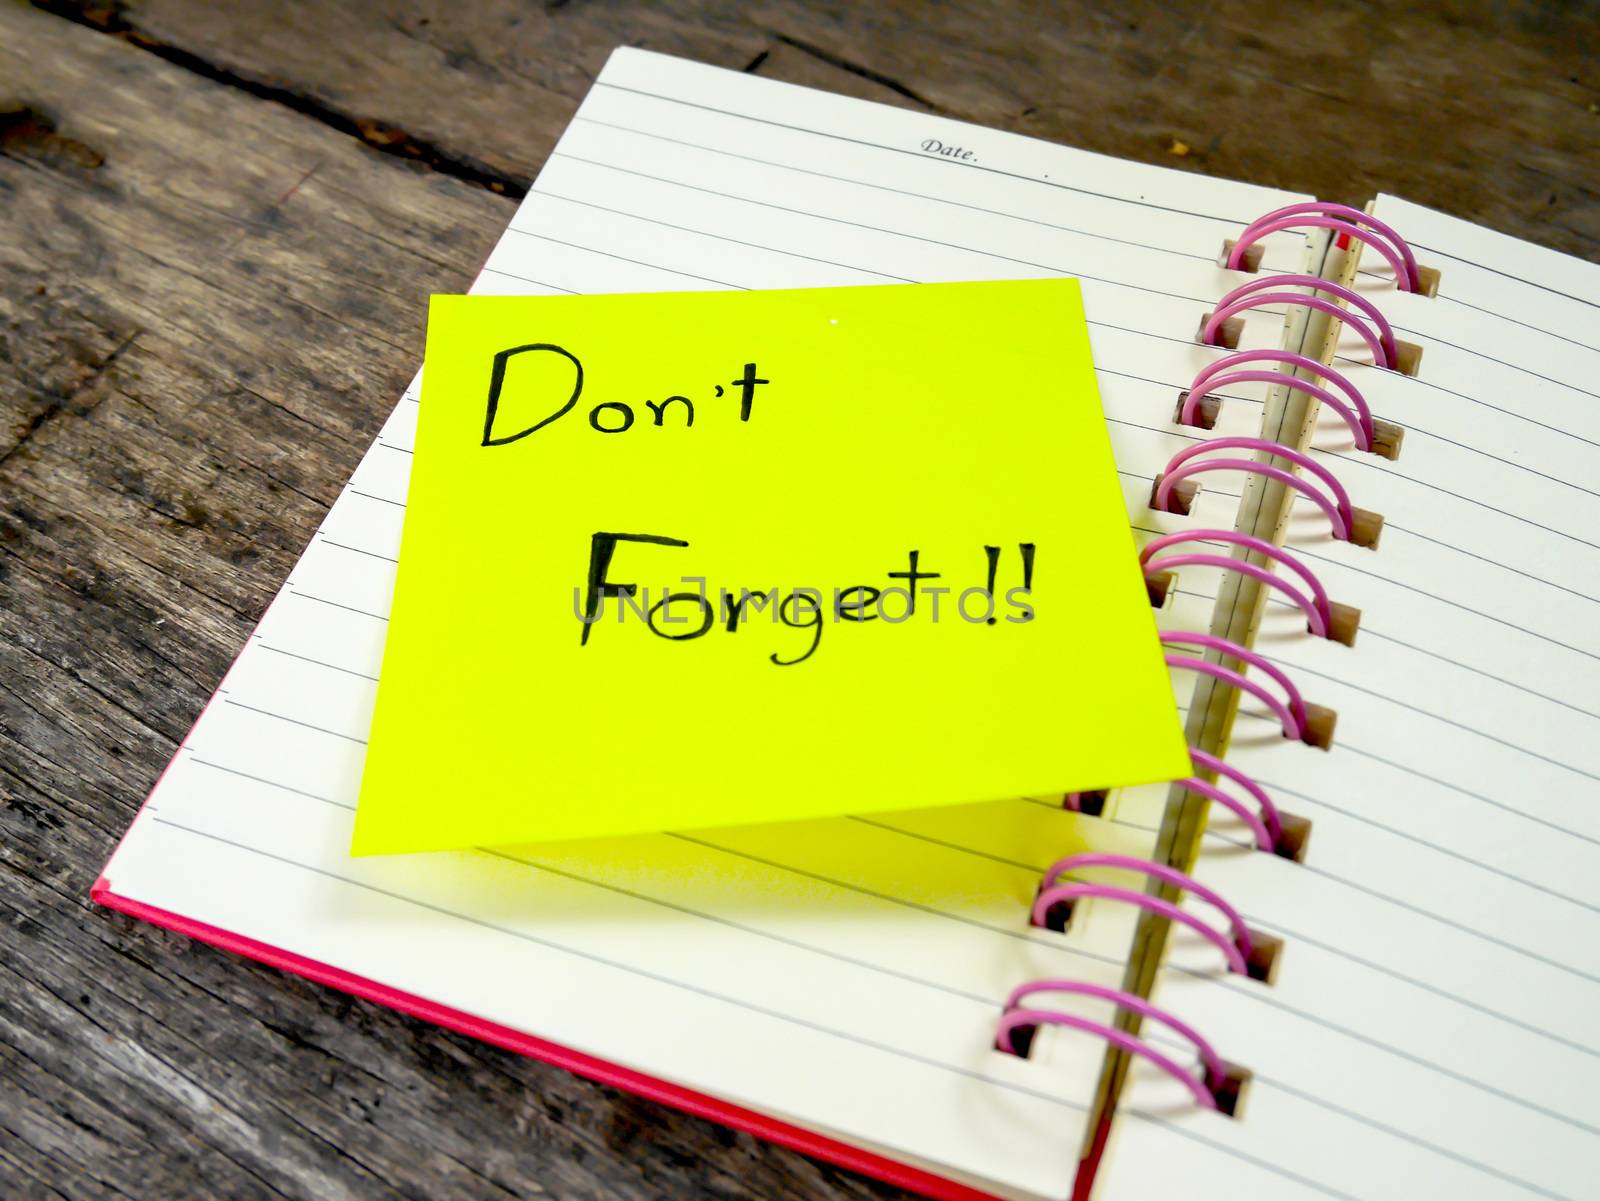 Focus reminder paper note in note book on wooden table 